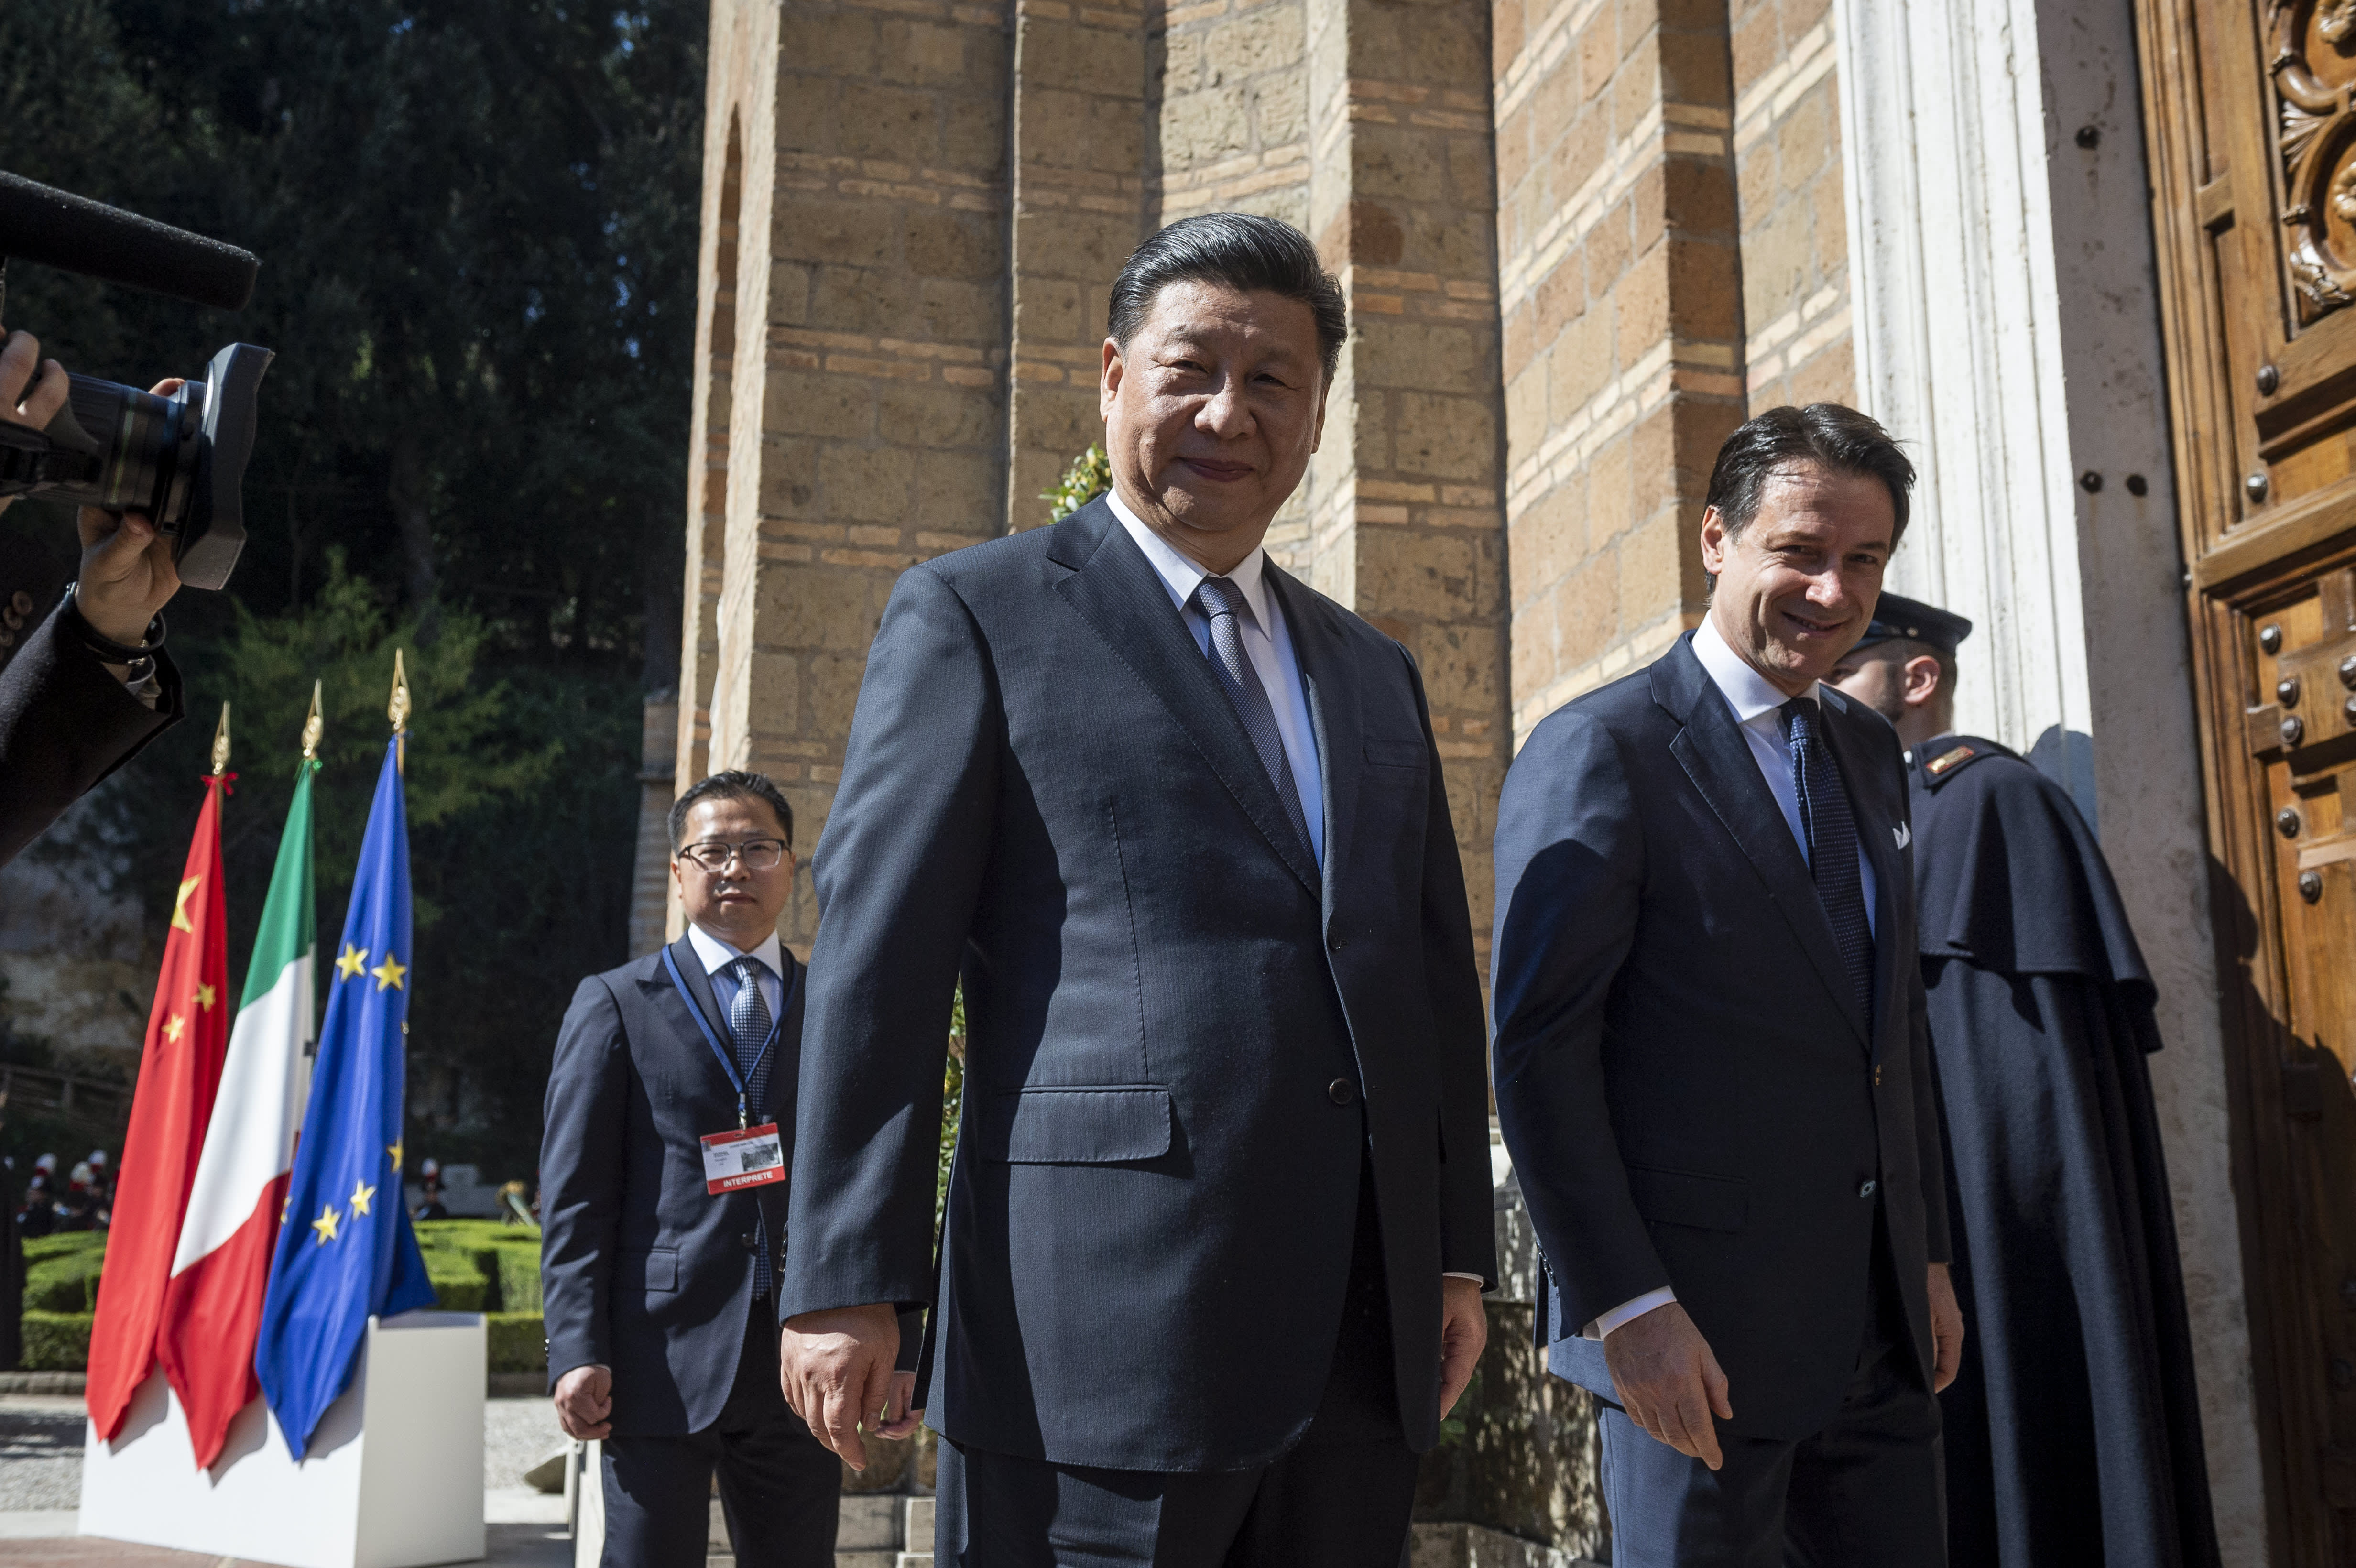 No longer in Belt and Road Initiative, Italy focuses on strategic